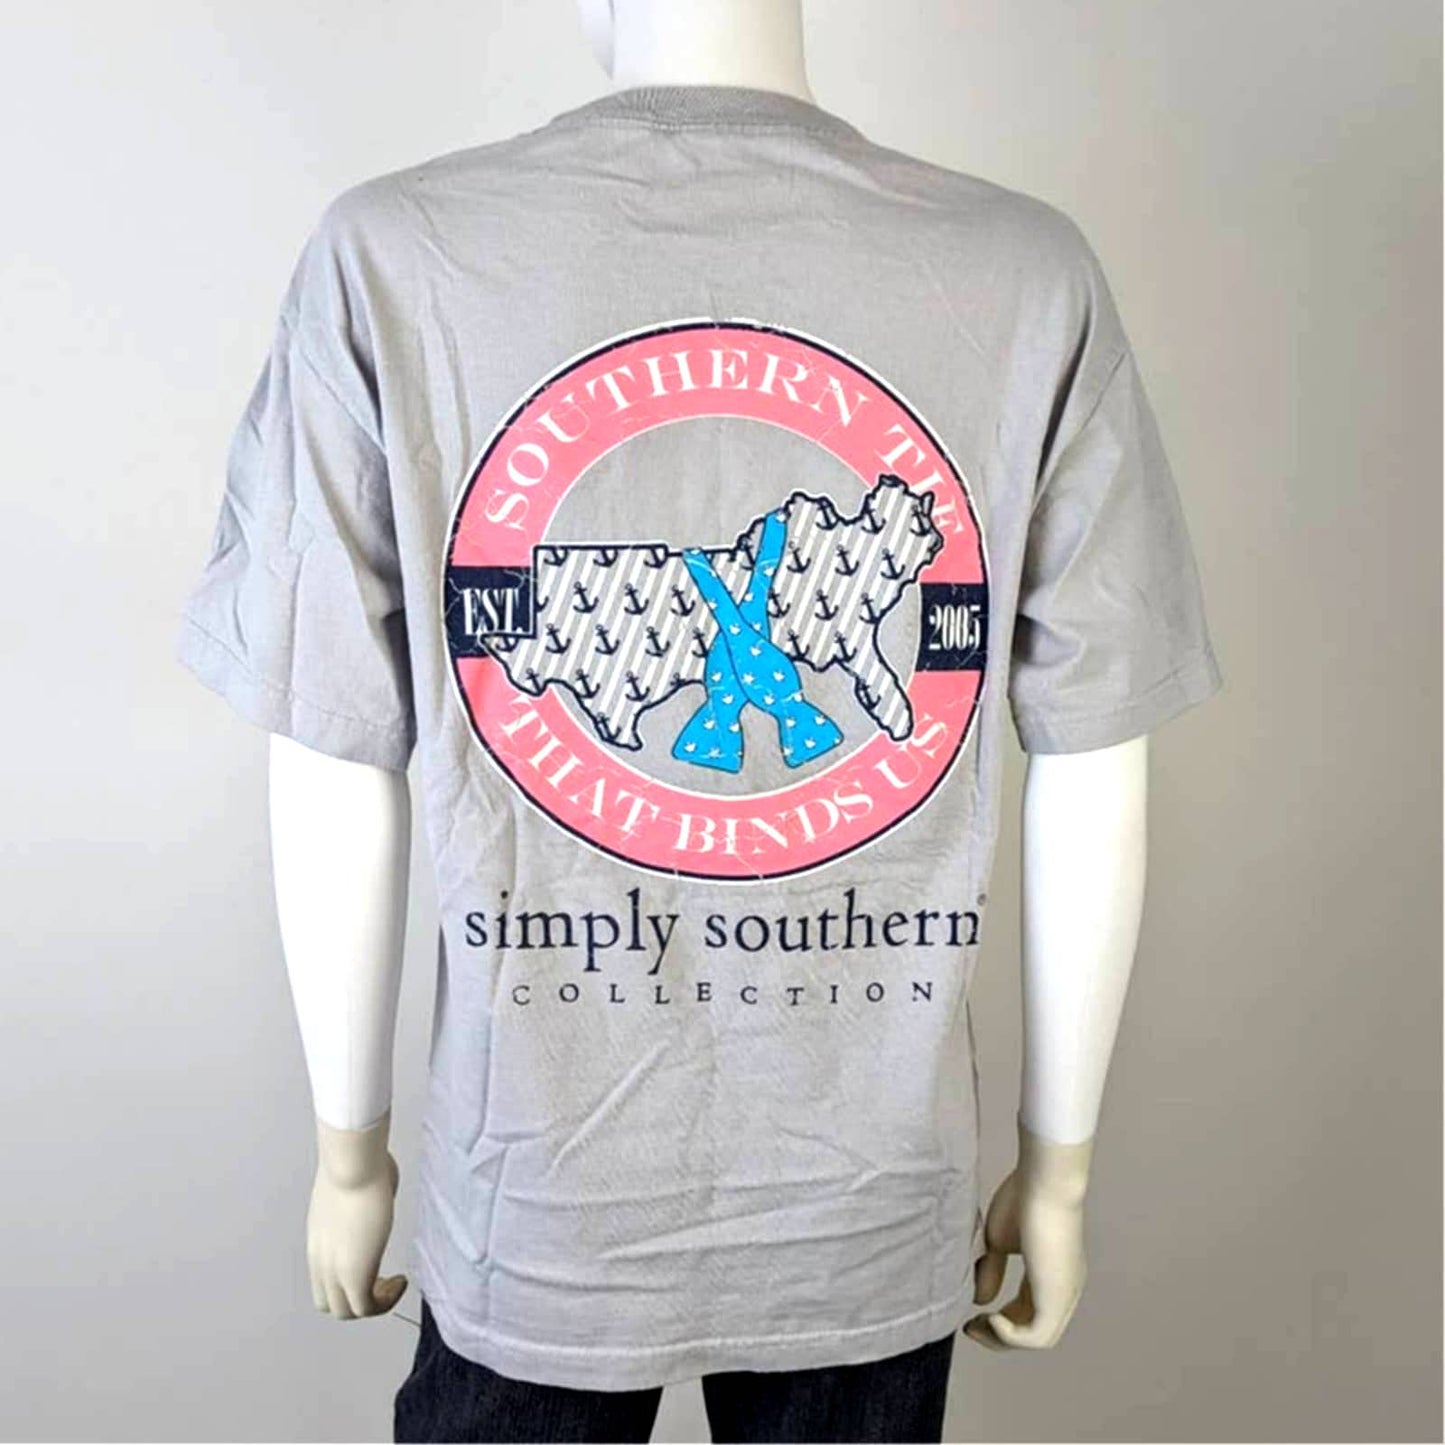 Simply Southern United States Tee - M